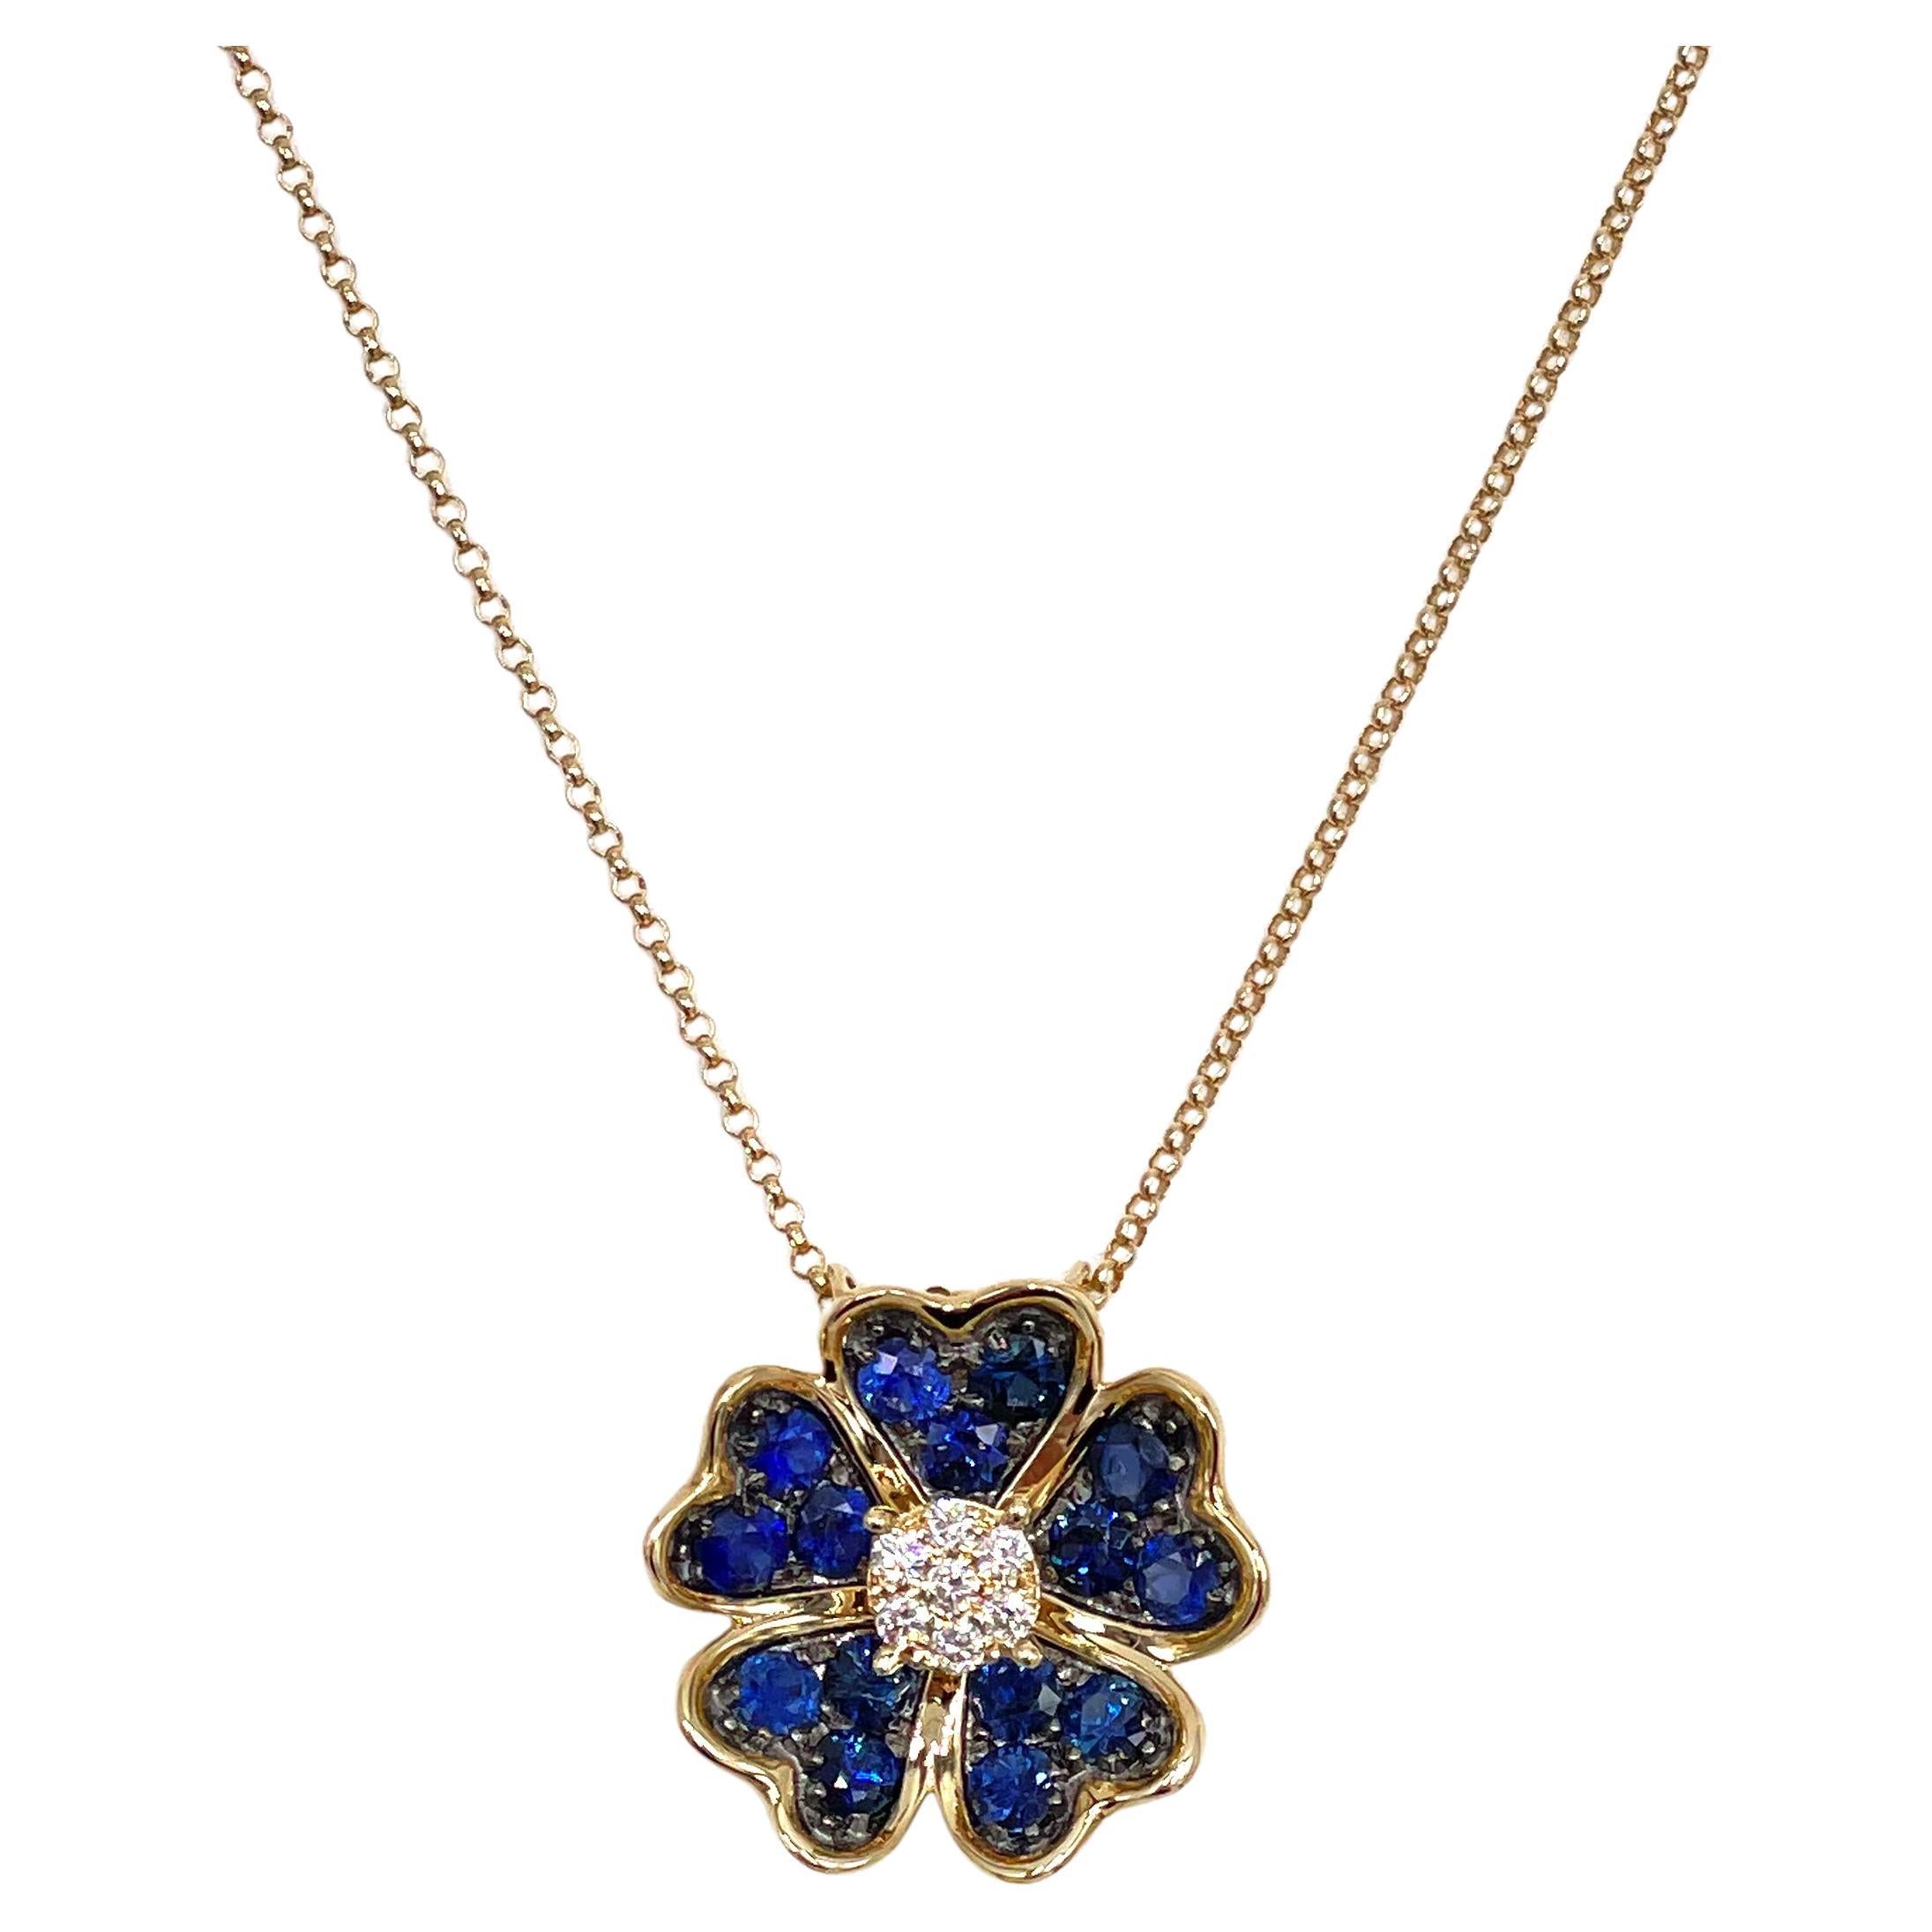 14k Yellow Gold Flower Pendant Necklace with Sapphires and Diamonds